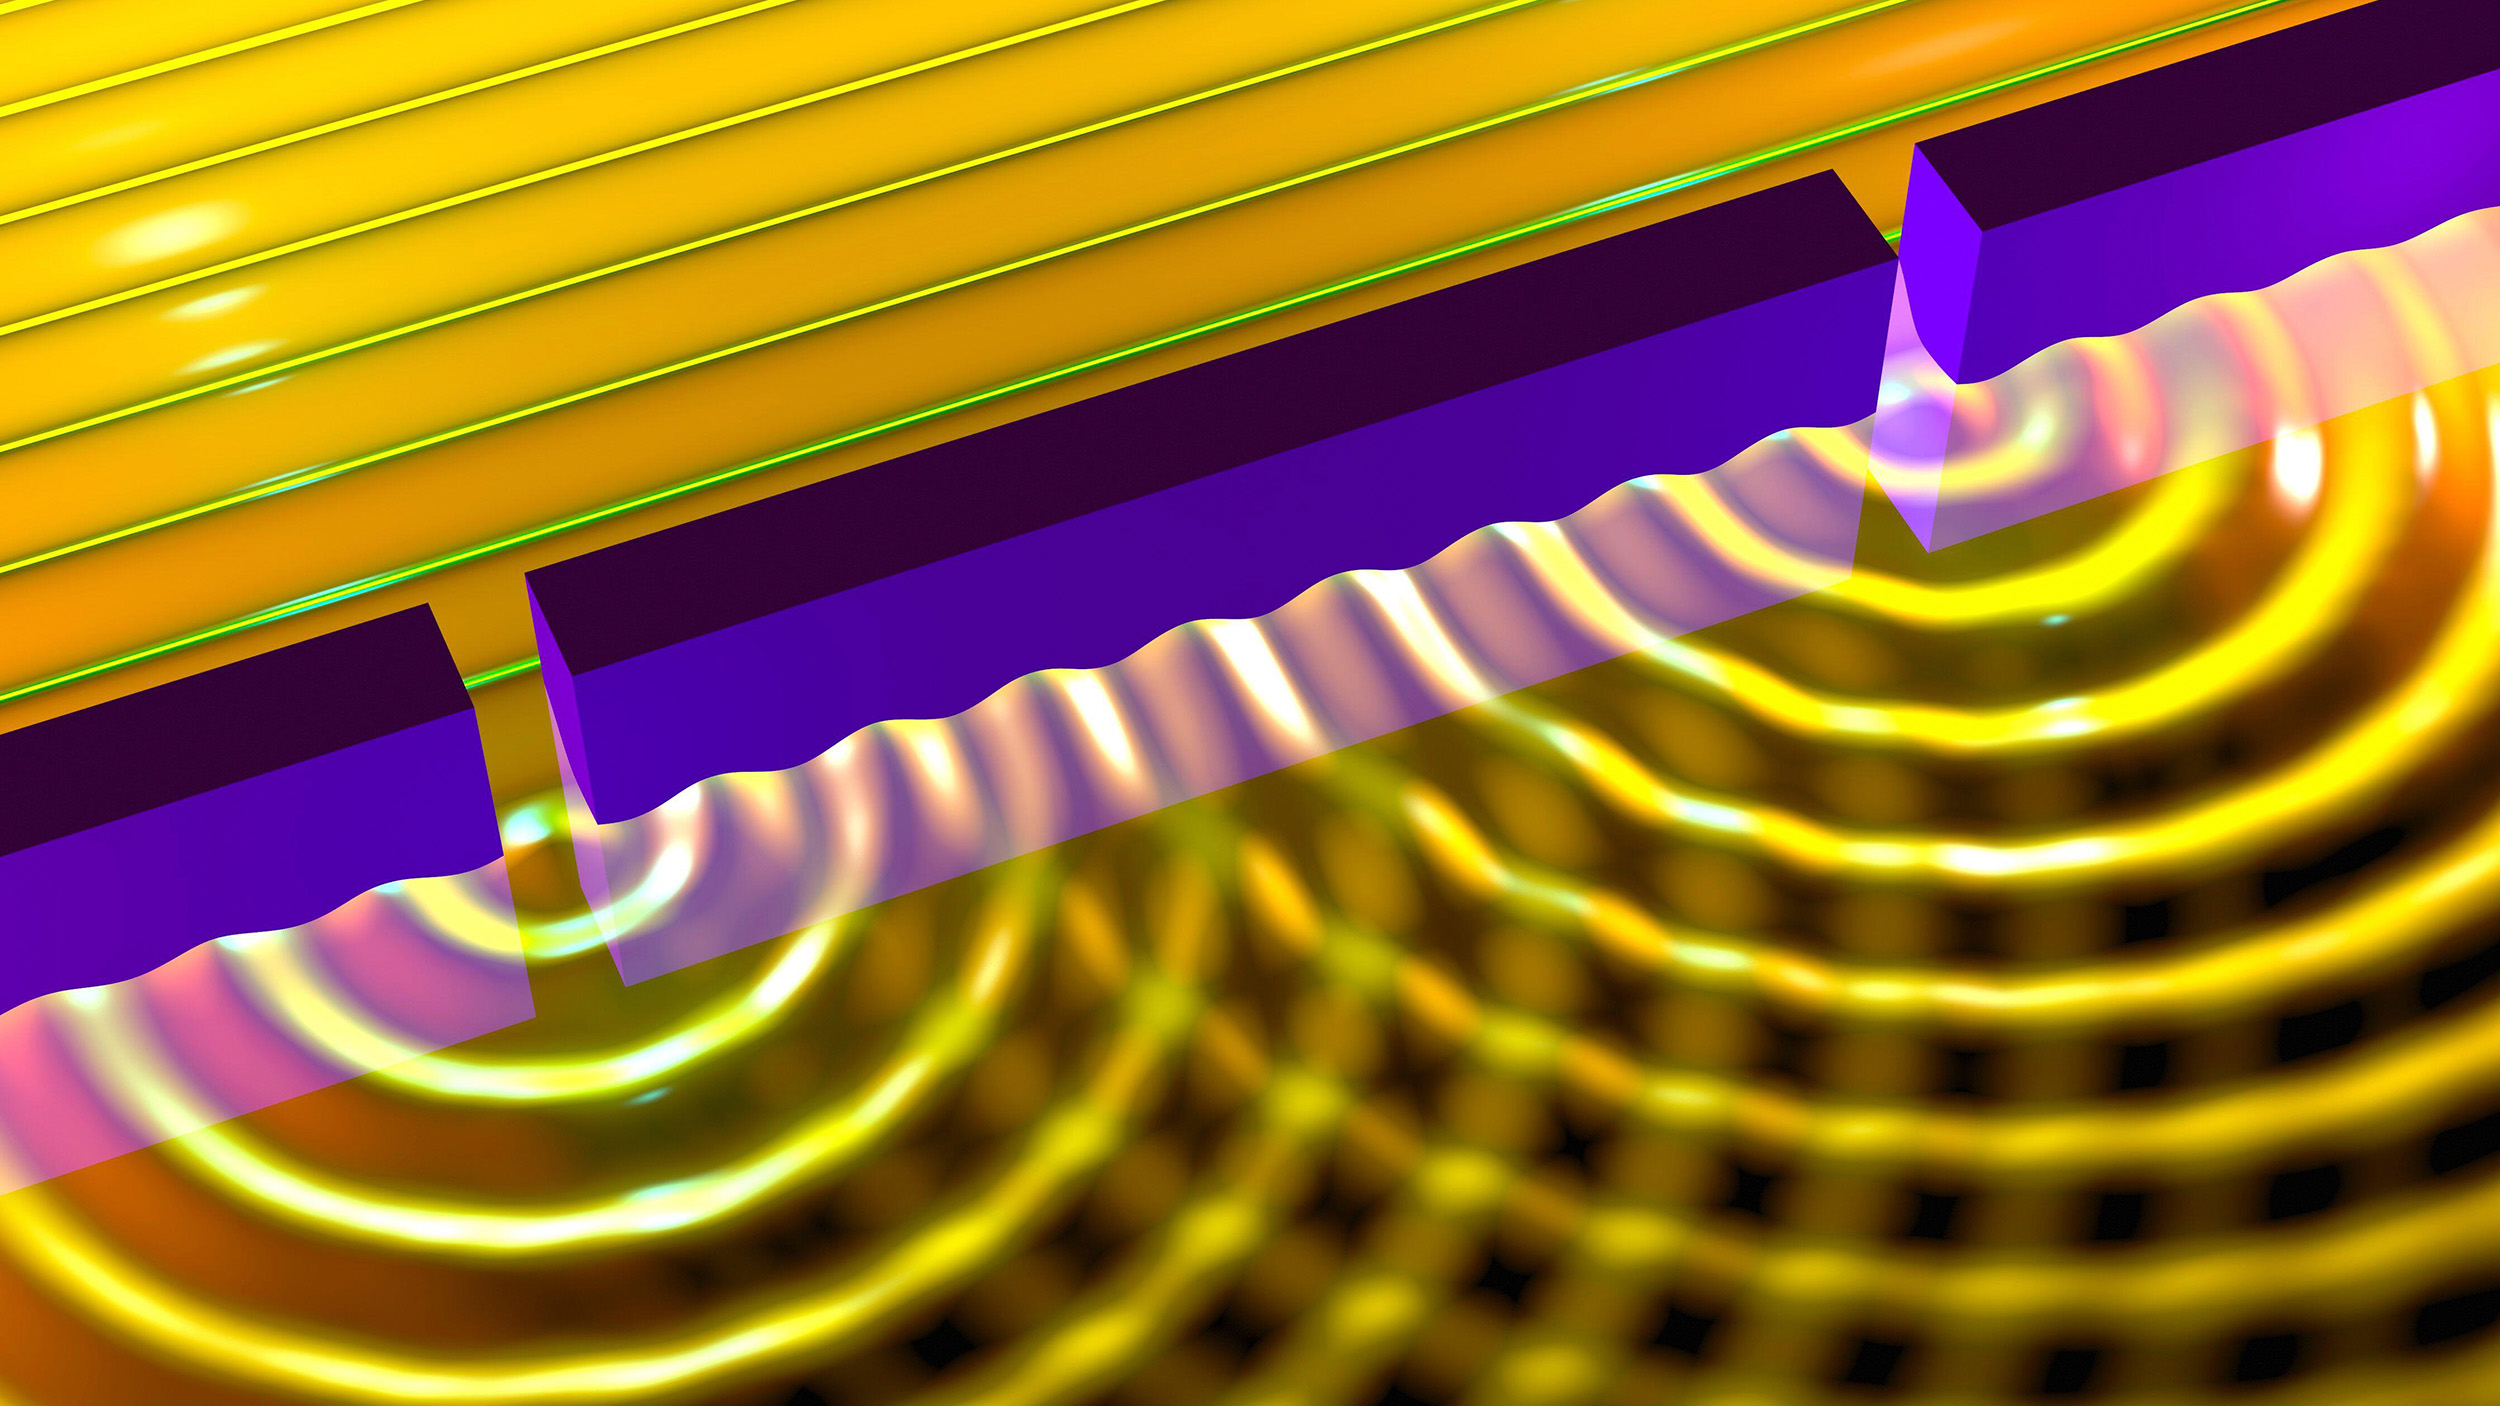 An image of a yellow and purple wave with an unclear origin.